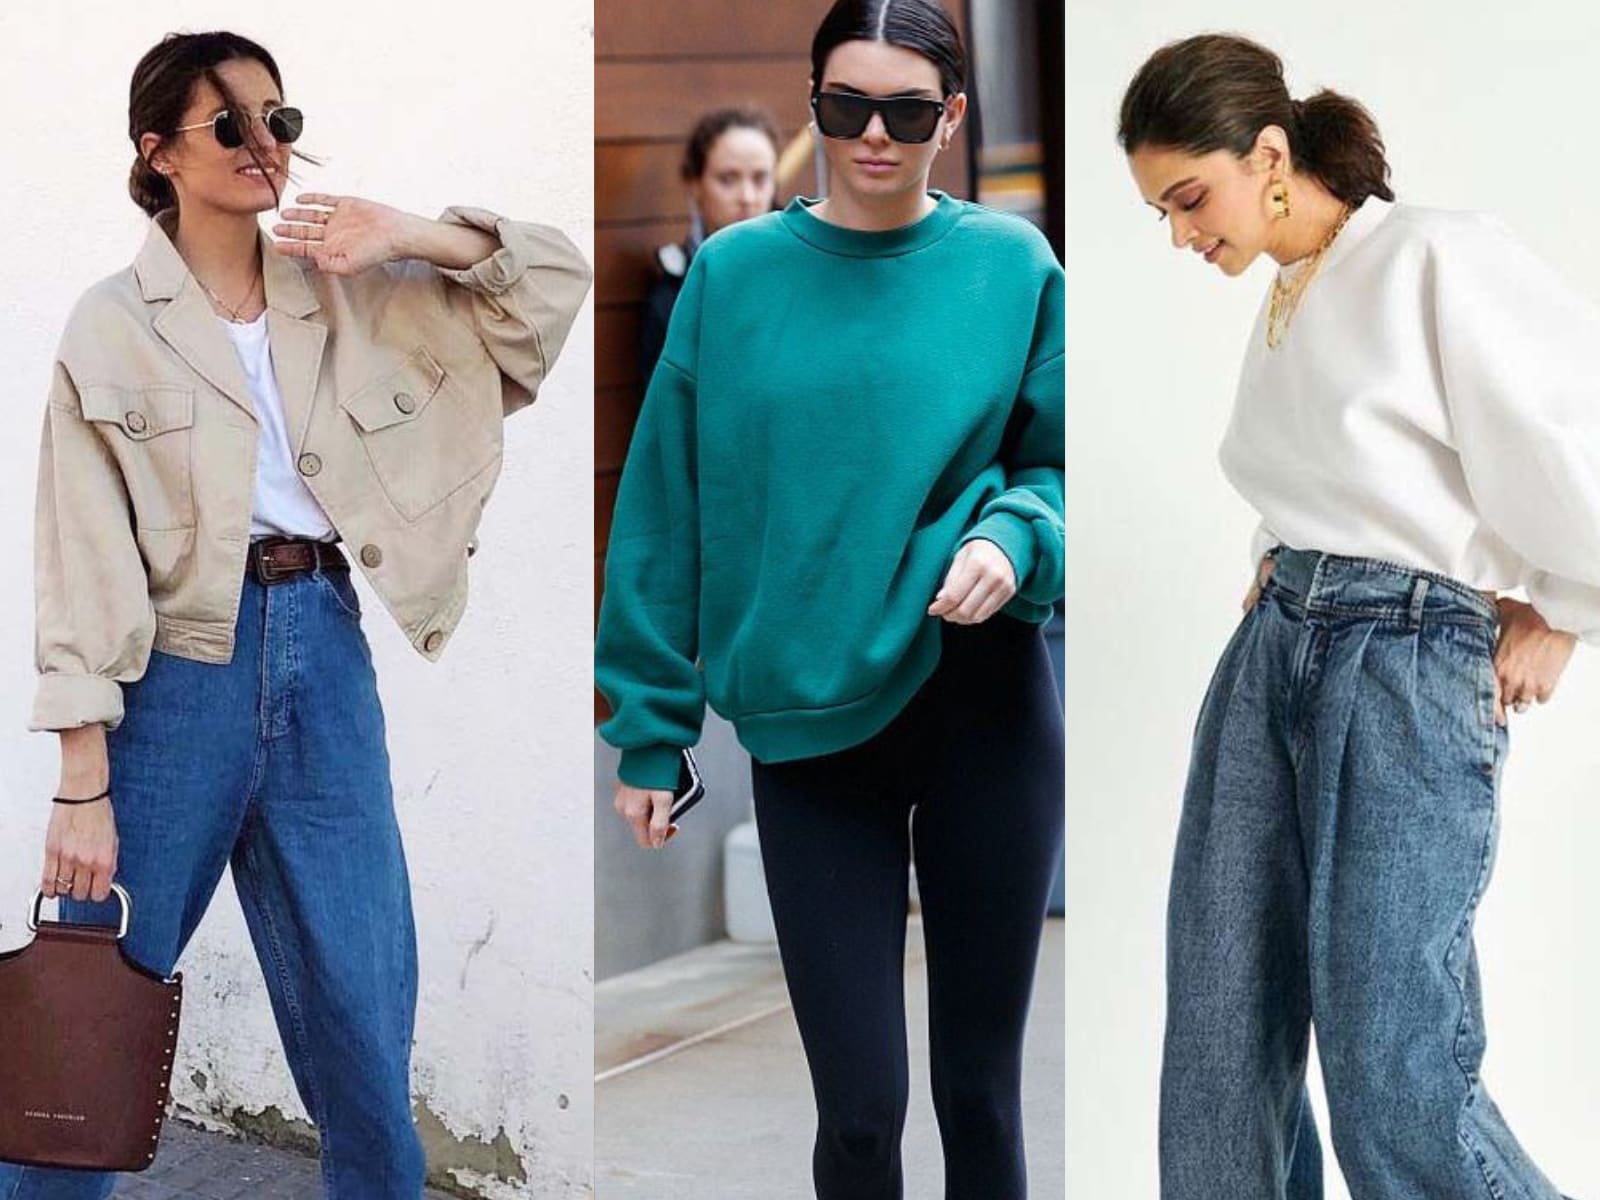 How To Wear Oversized Clothes- Tips On How to Rock Baggy Clothing